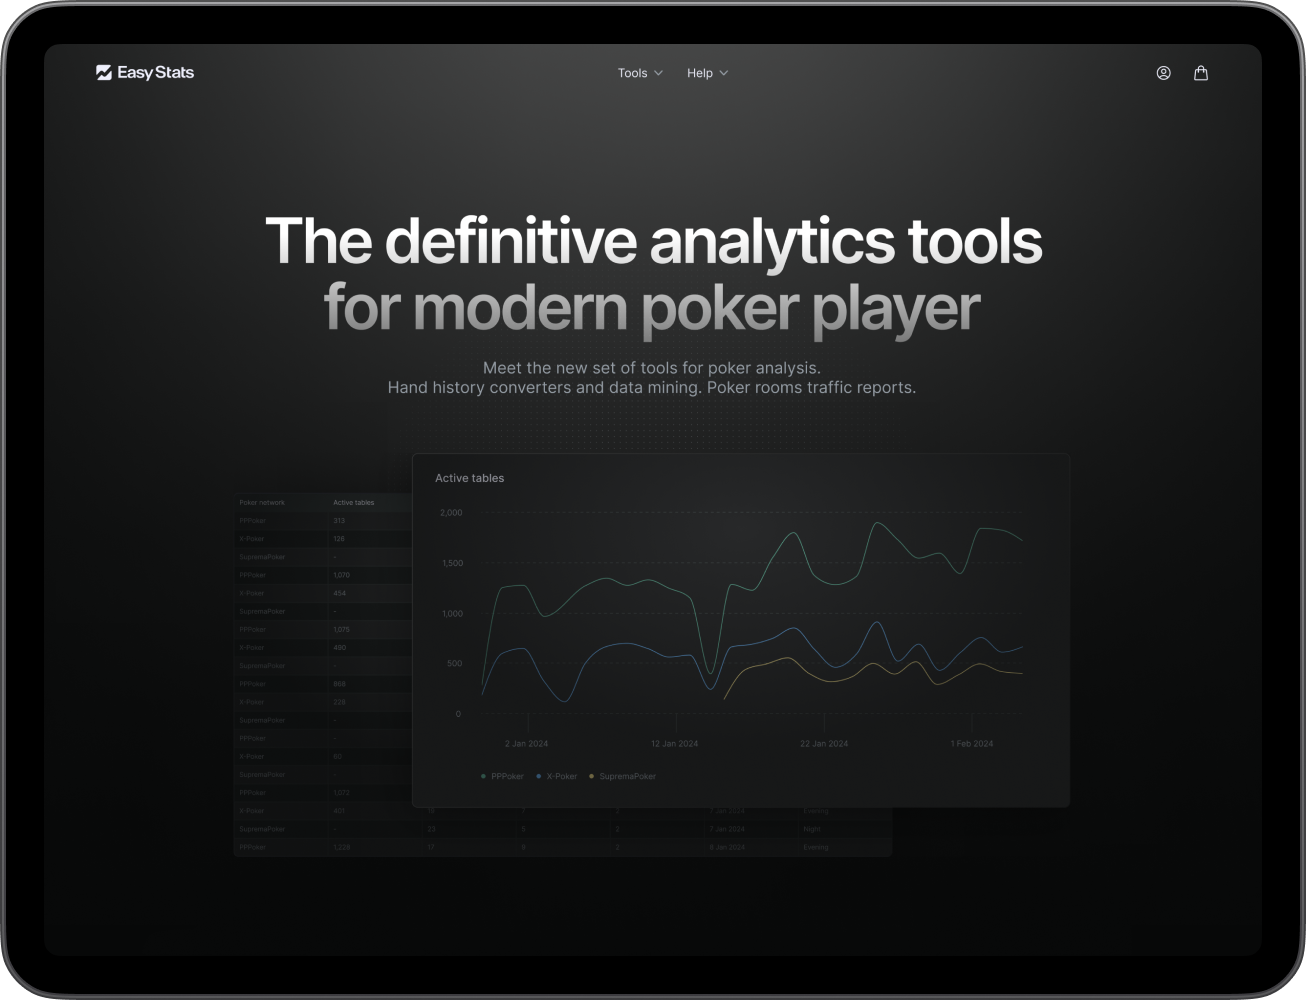 Image of a landing page of a website selling poker analytics tools